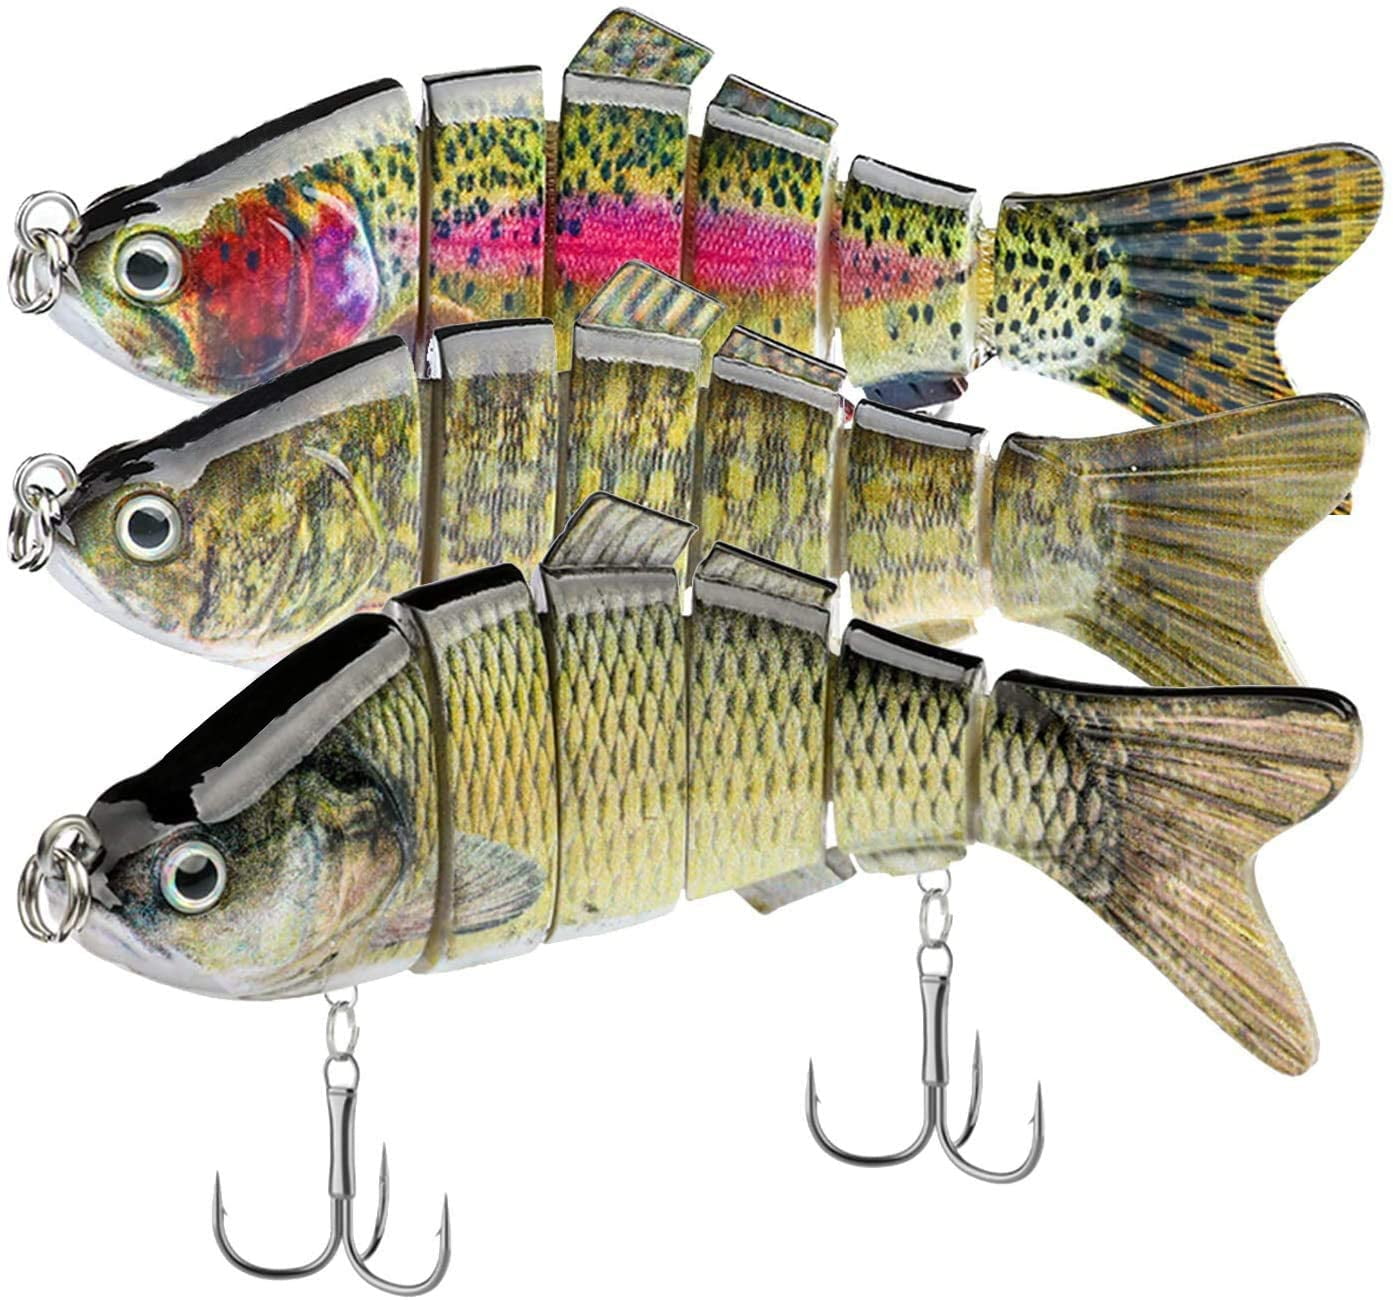 Fishing Lures for Bass Trout Jointed Swimbaits Bionic Swimming Lure Freshwater Saltwater Slow Sinking Bass Fishing Lures Kit Pack of 4 Lifelike